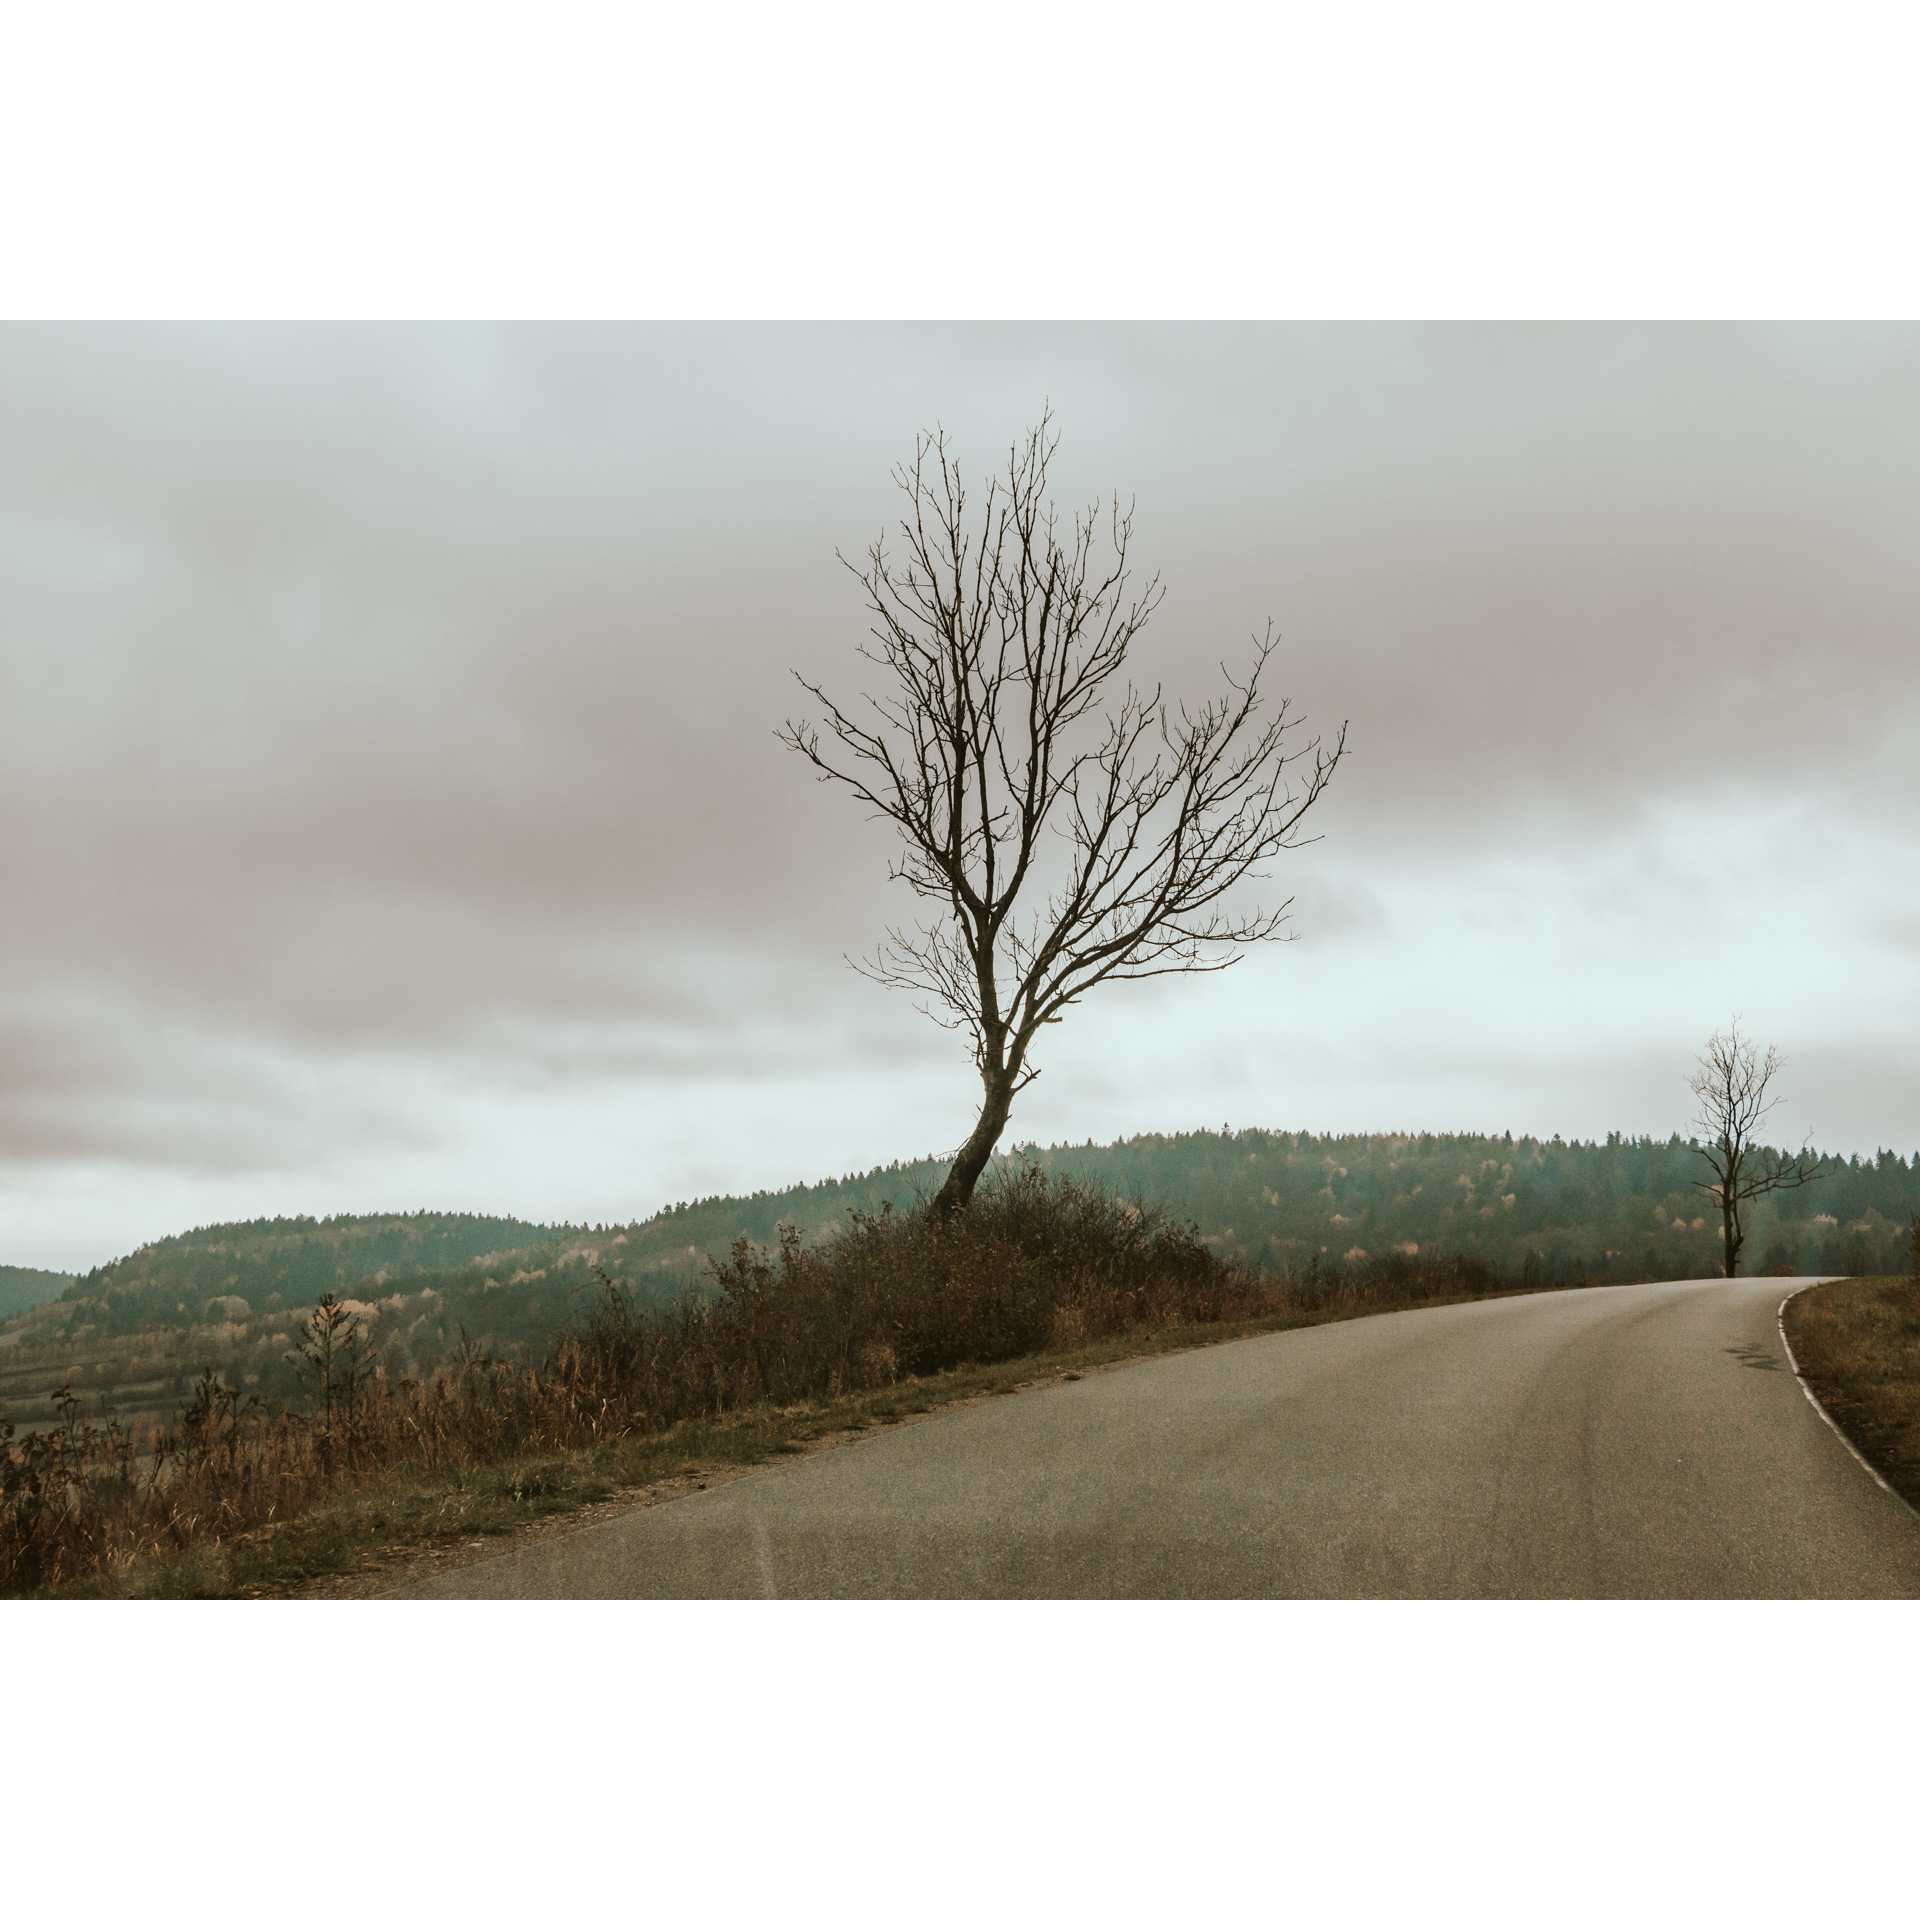 In the middle, a tree without leaves growing by the asphalt road turning right against the gray sky